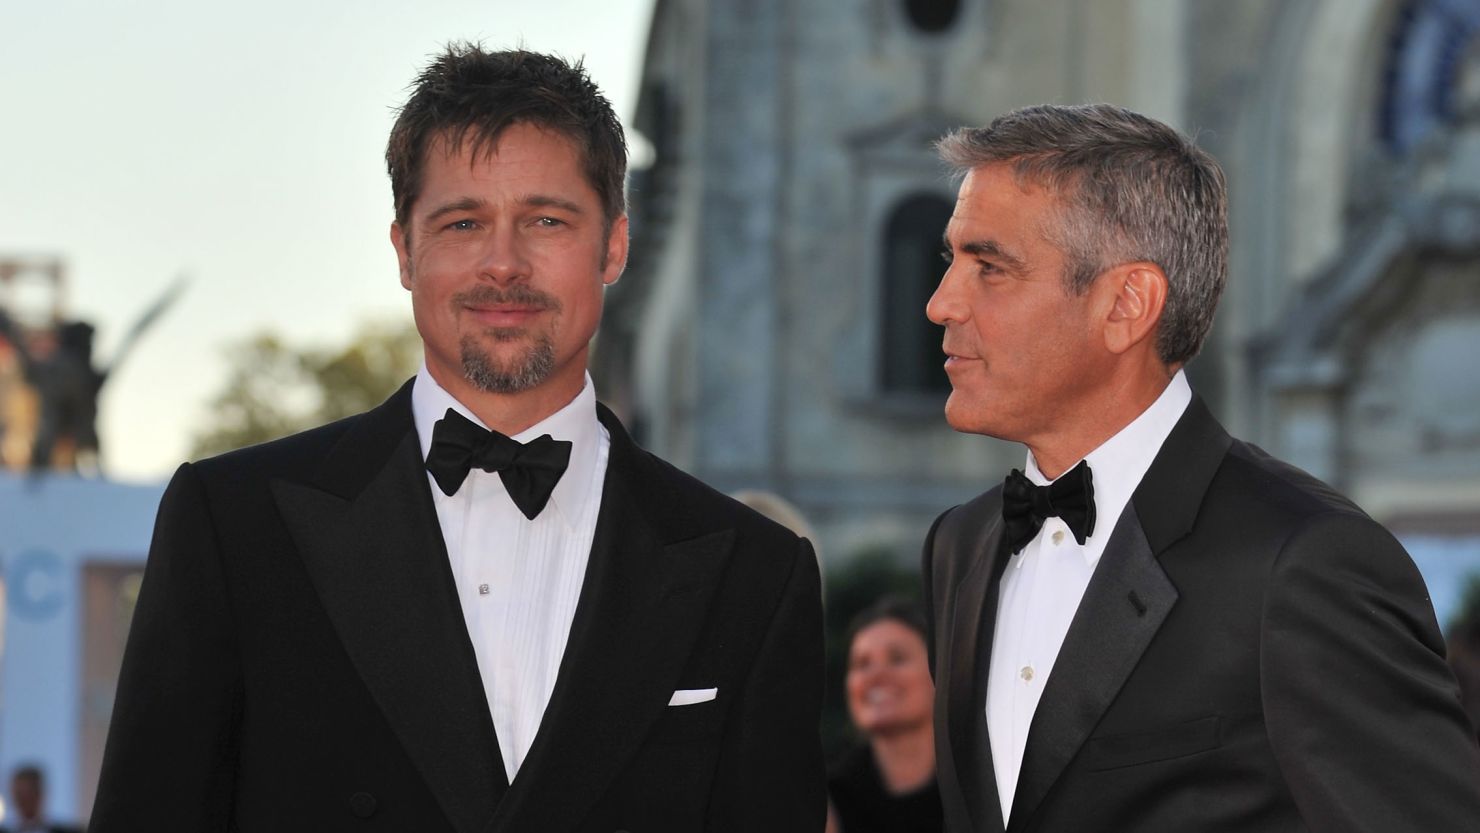 Both Brad Pitt, left, and George Clooney could receive Oscar nominations for this year's work.